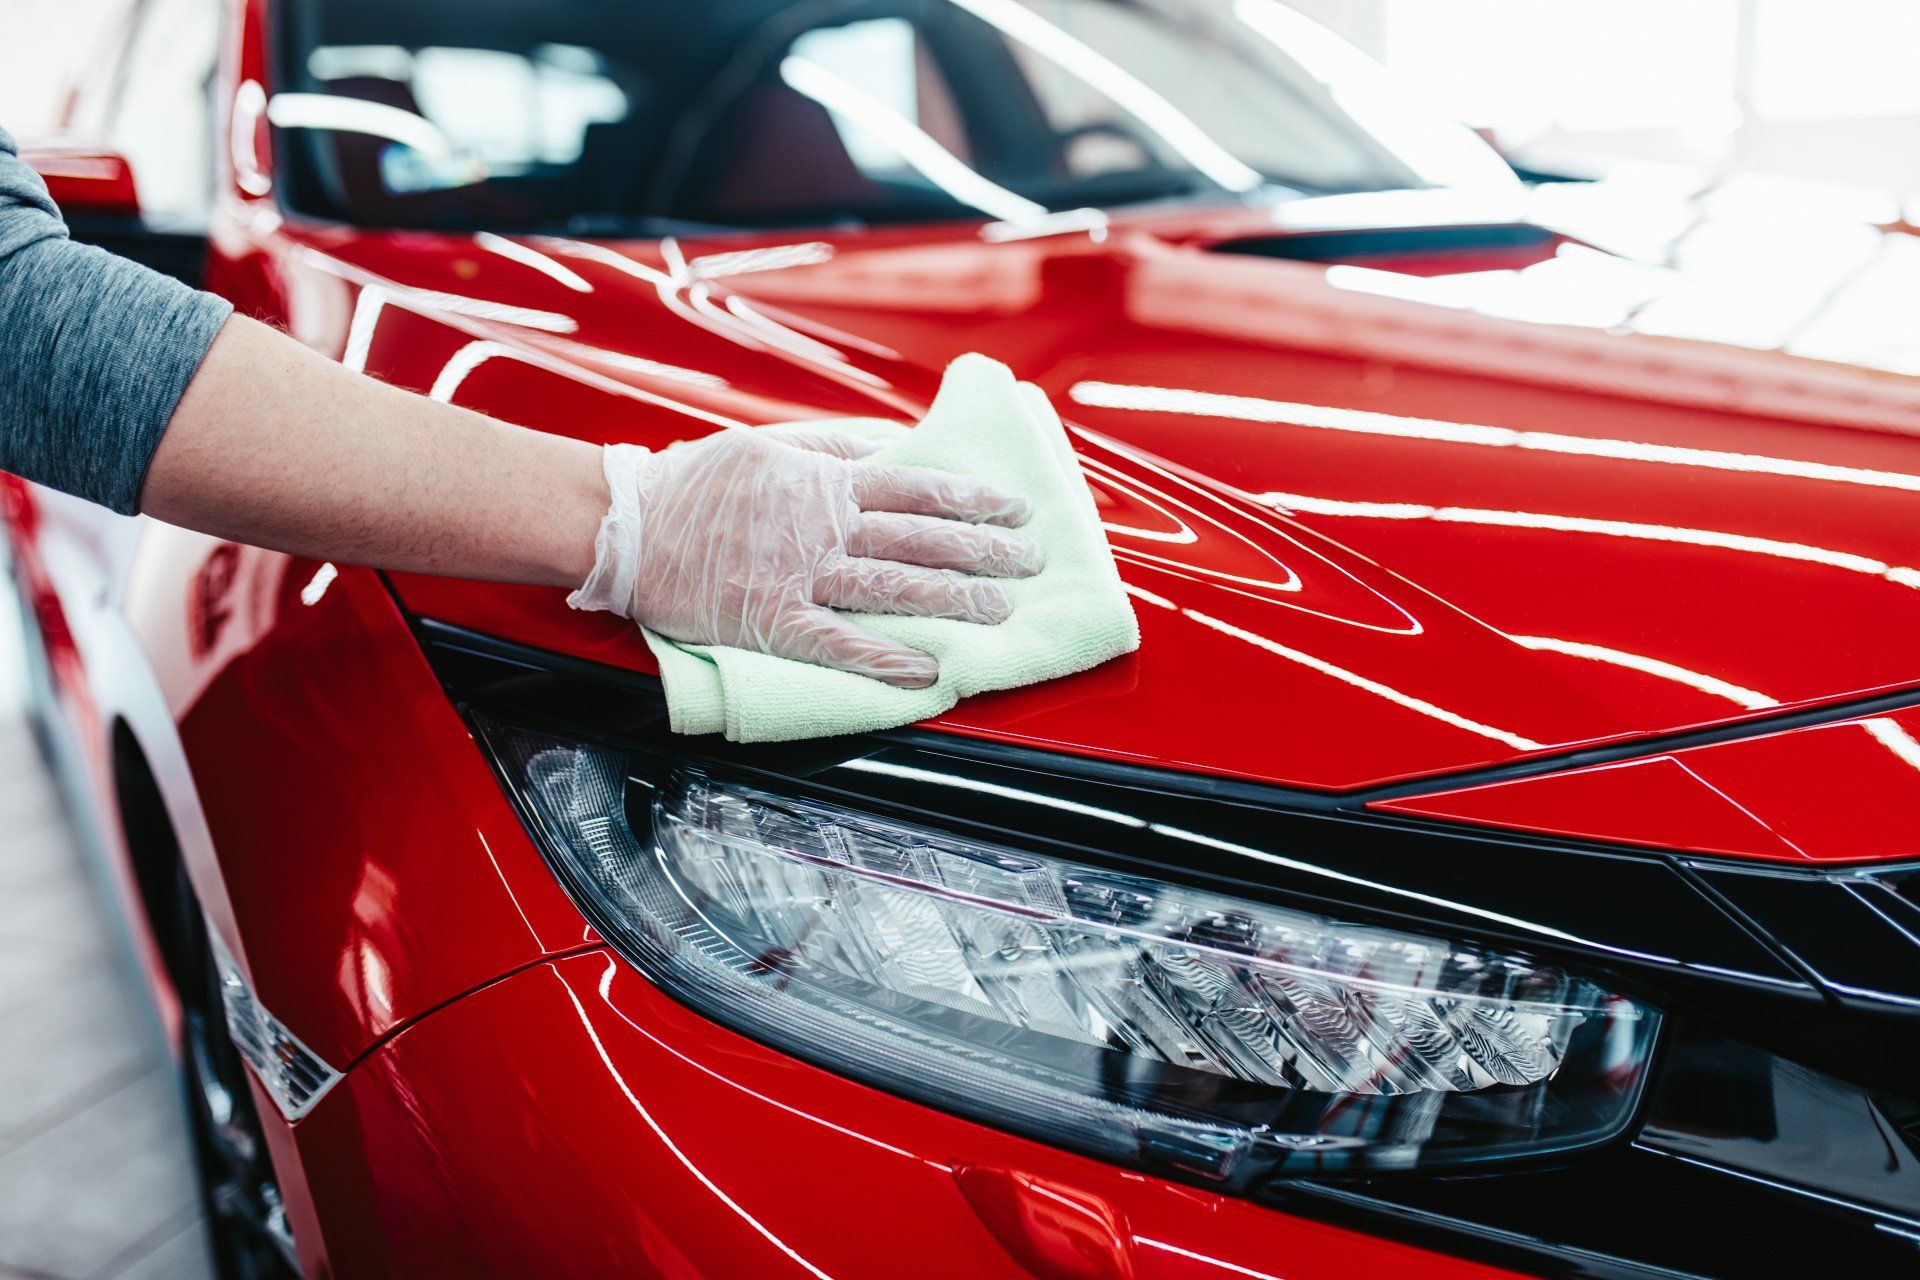 Car cleaning sponges: To ensure complete hygiene for your vehicle